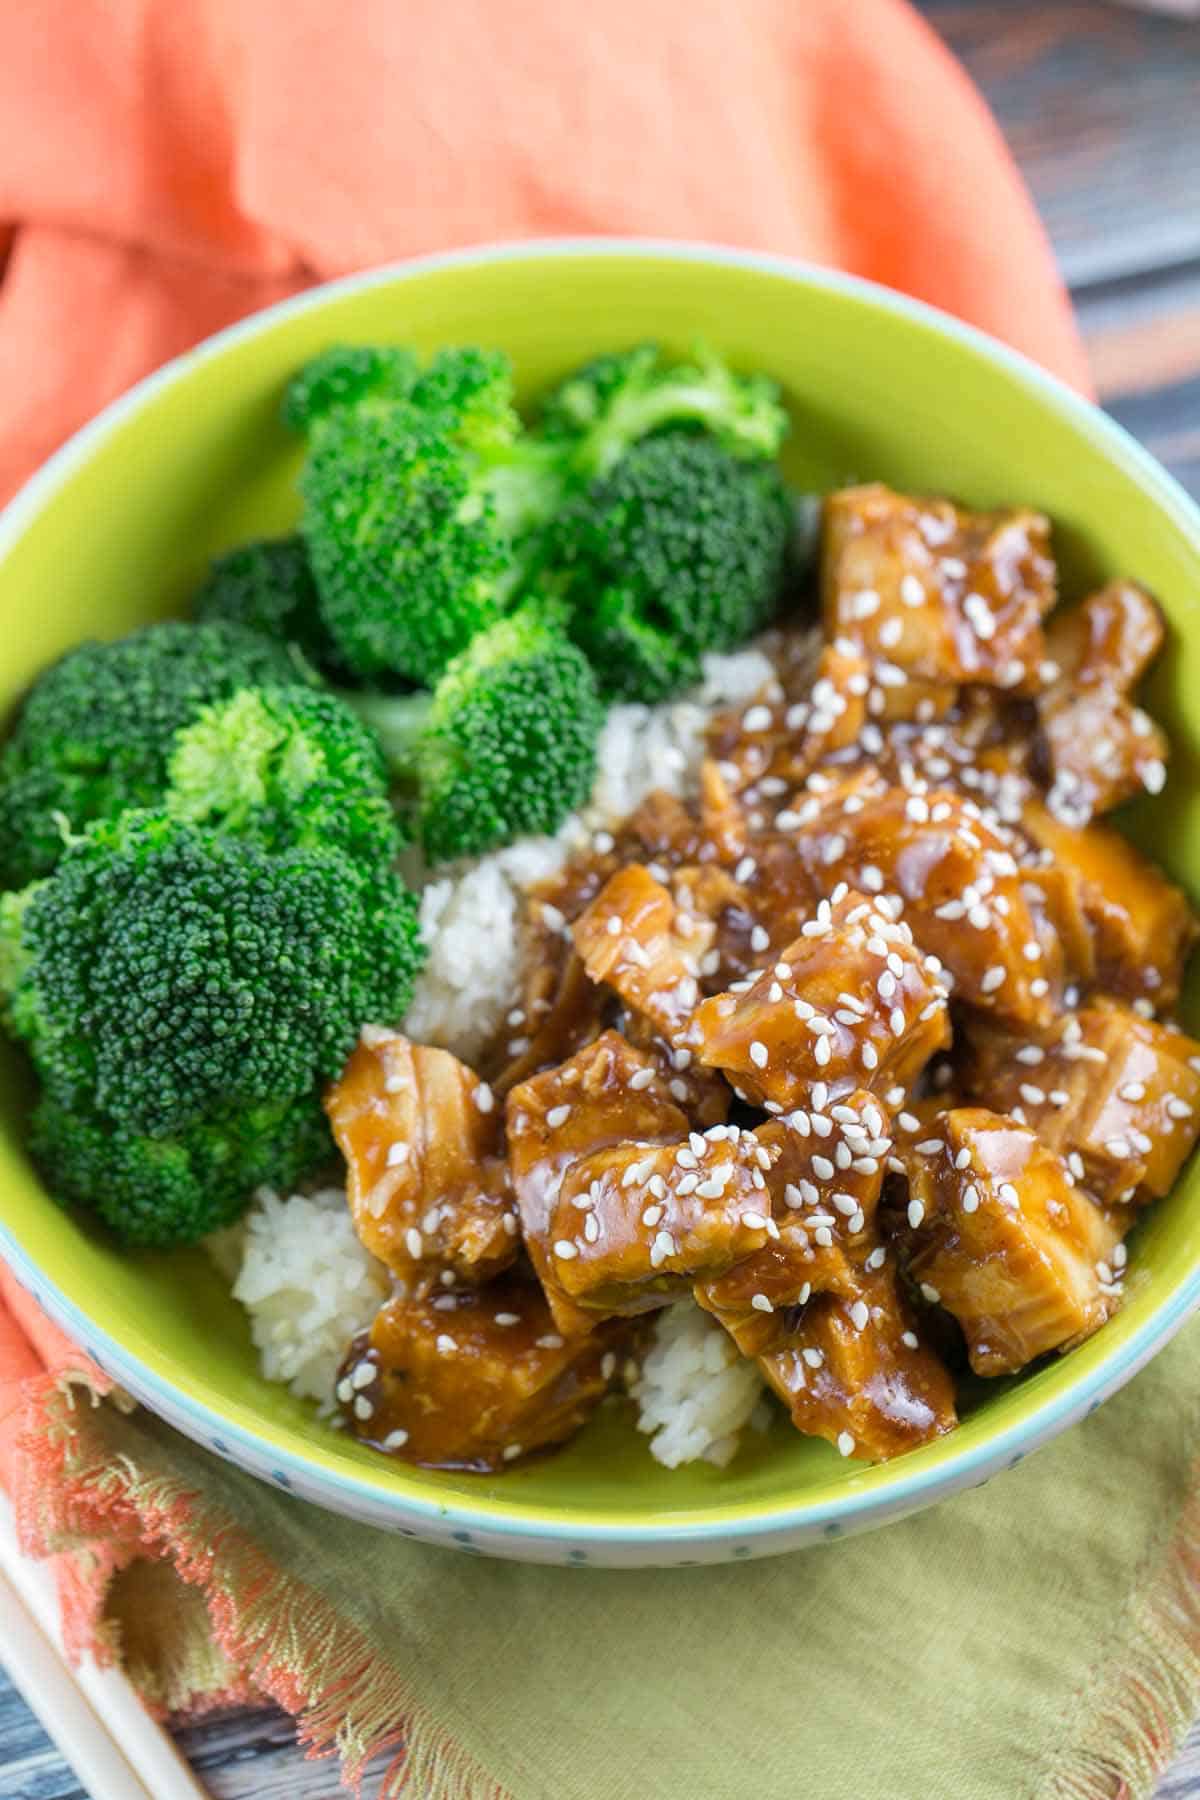 a green bowl filled with cubes of chicken in a honey sesame sauce and steamed broccoli